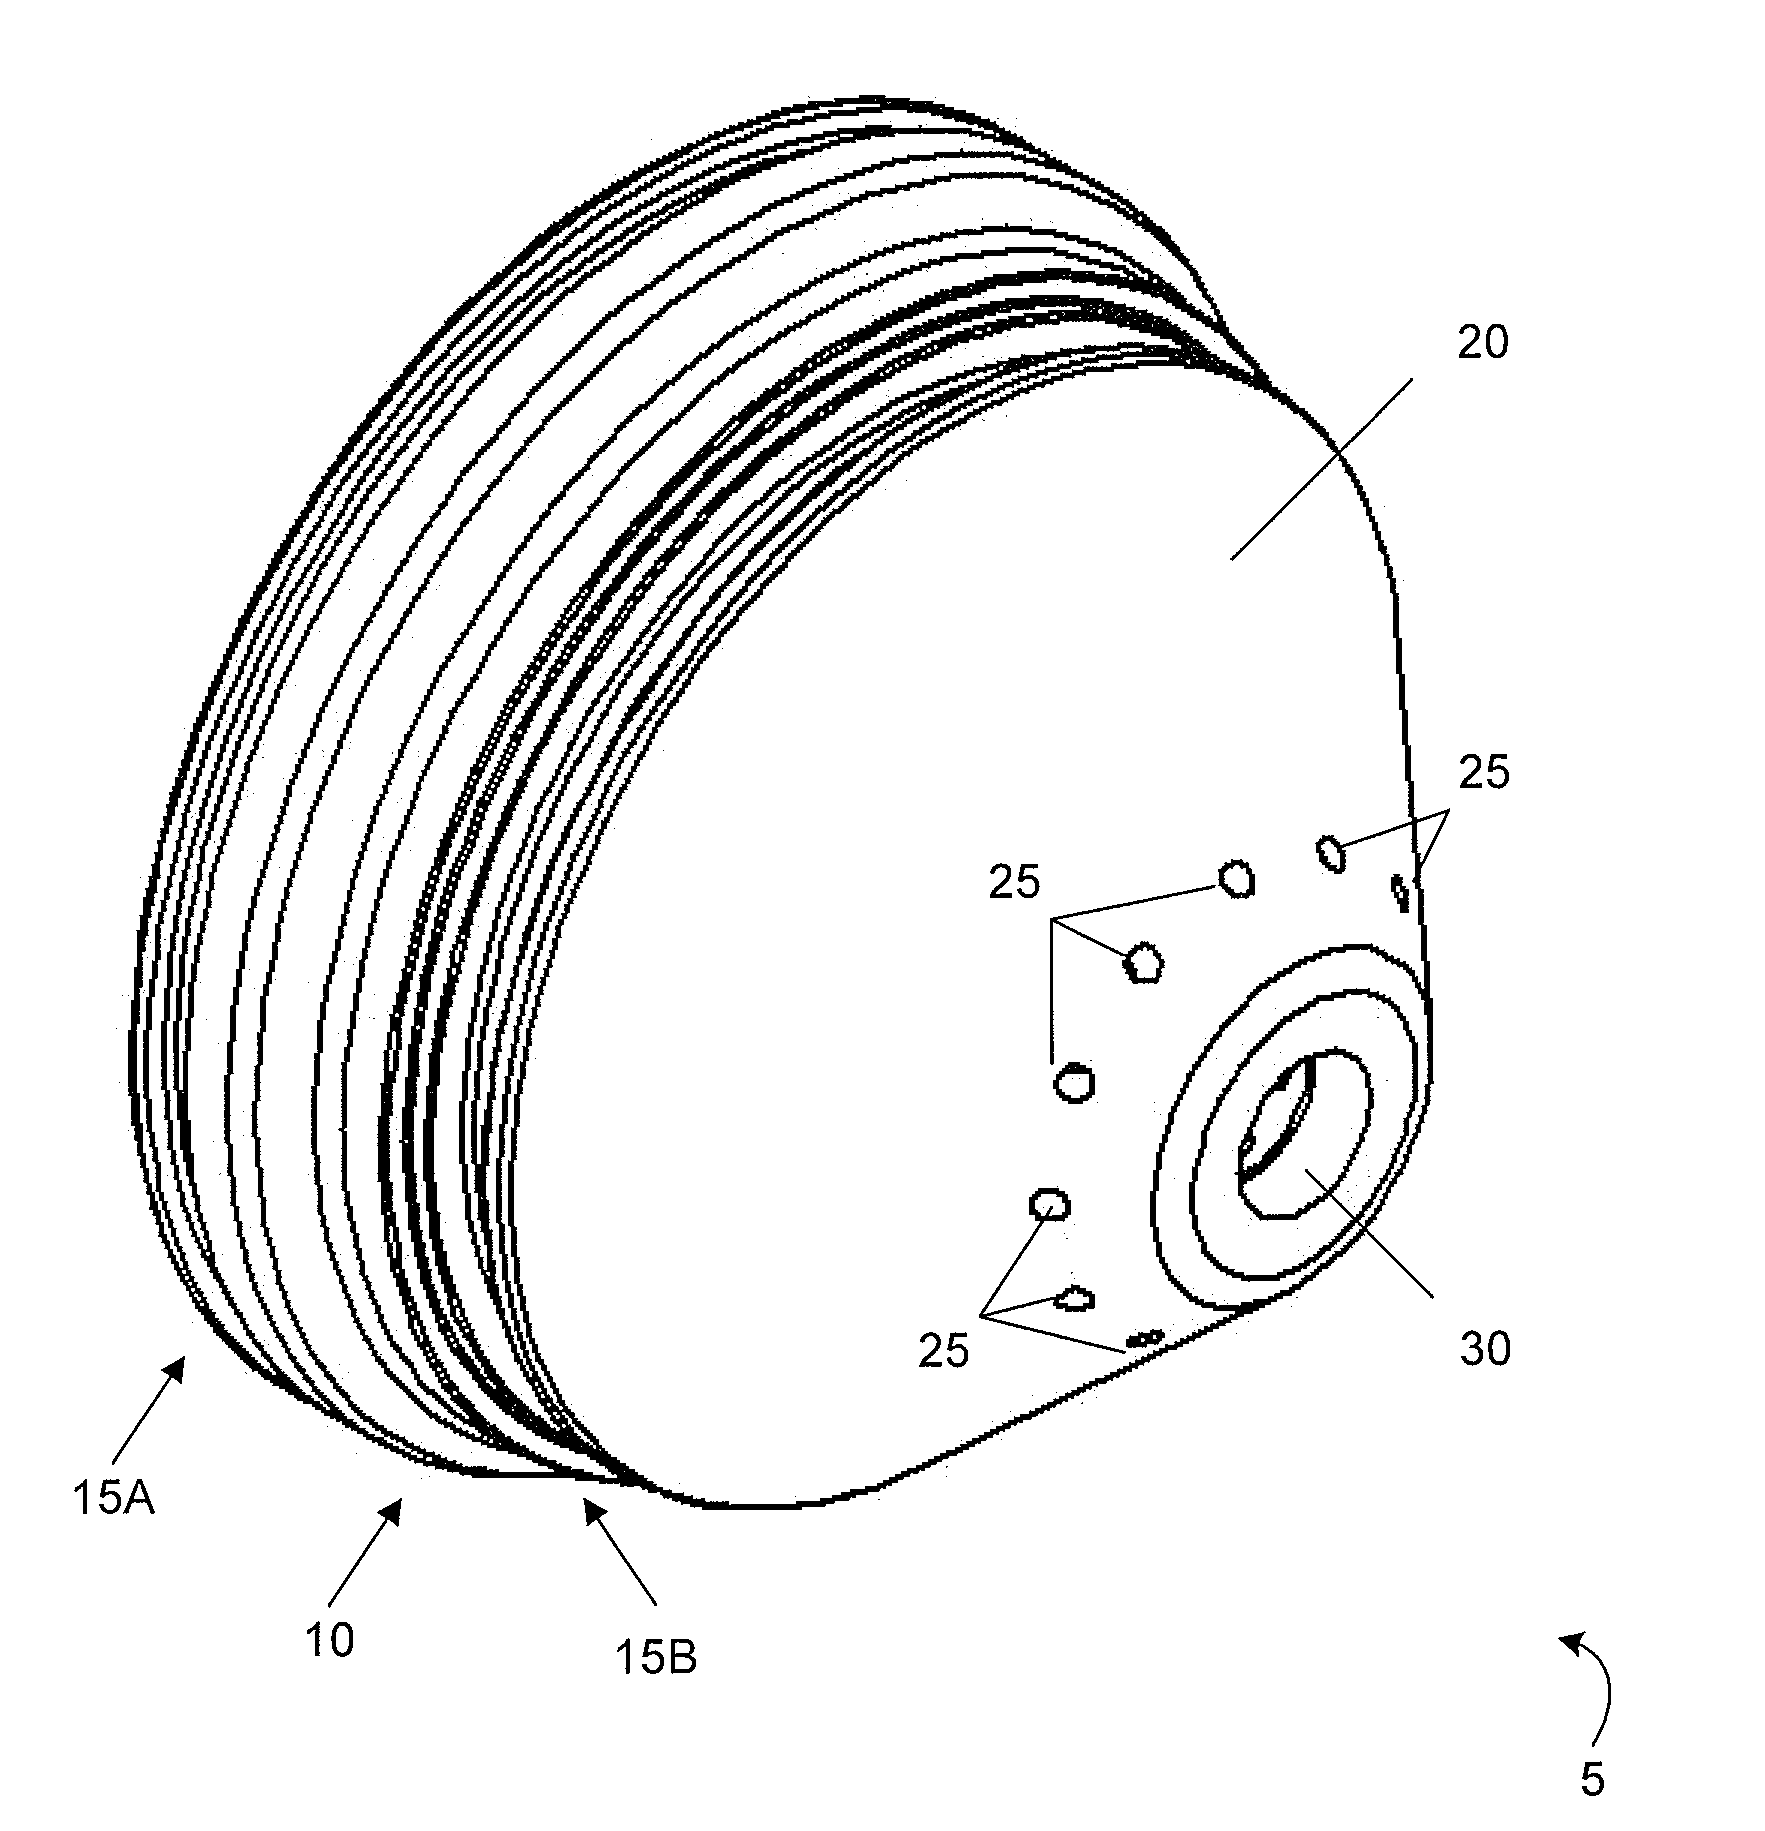 Apparatus and Method for a Liquid Cooled Shield for Improved Piercing Performance